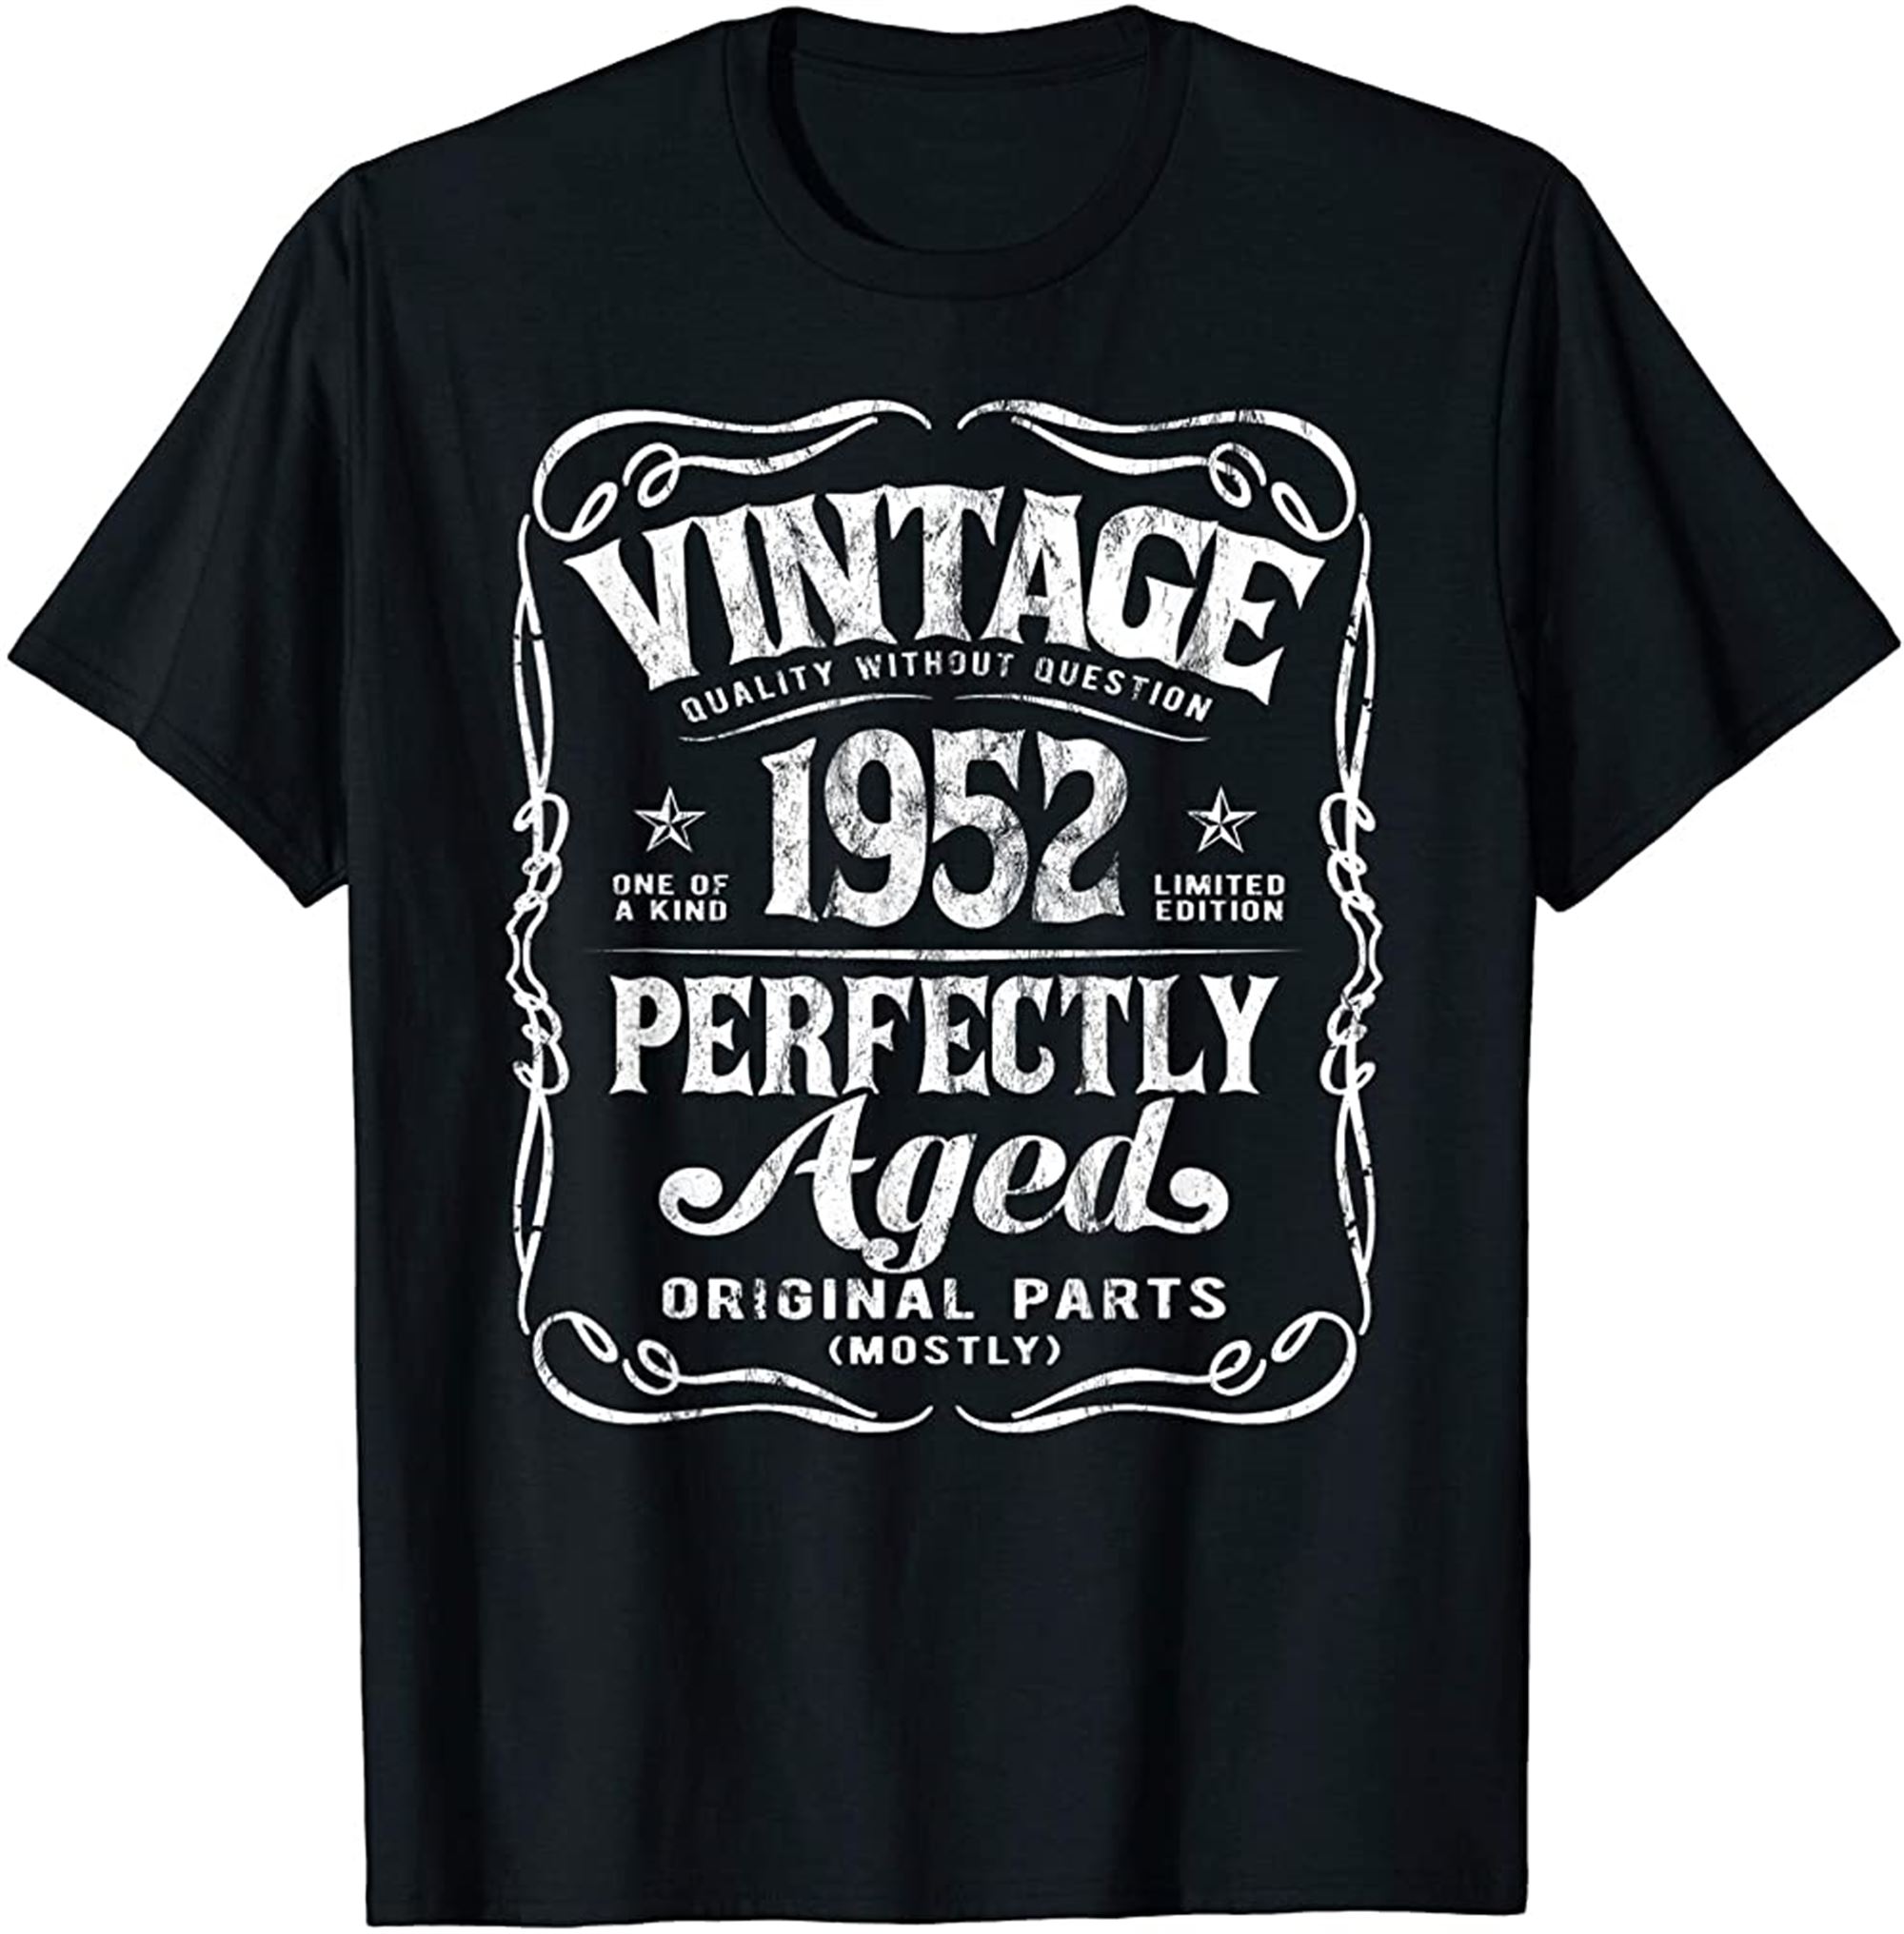 Vintage Made In 1952 Original 70th Birthday T-shirt Full Size Up To 5xl